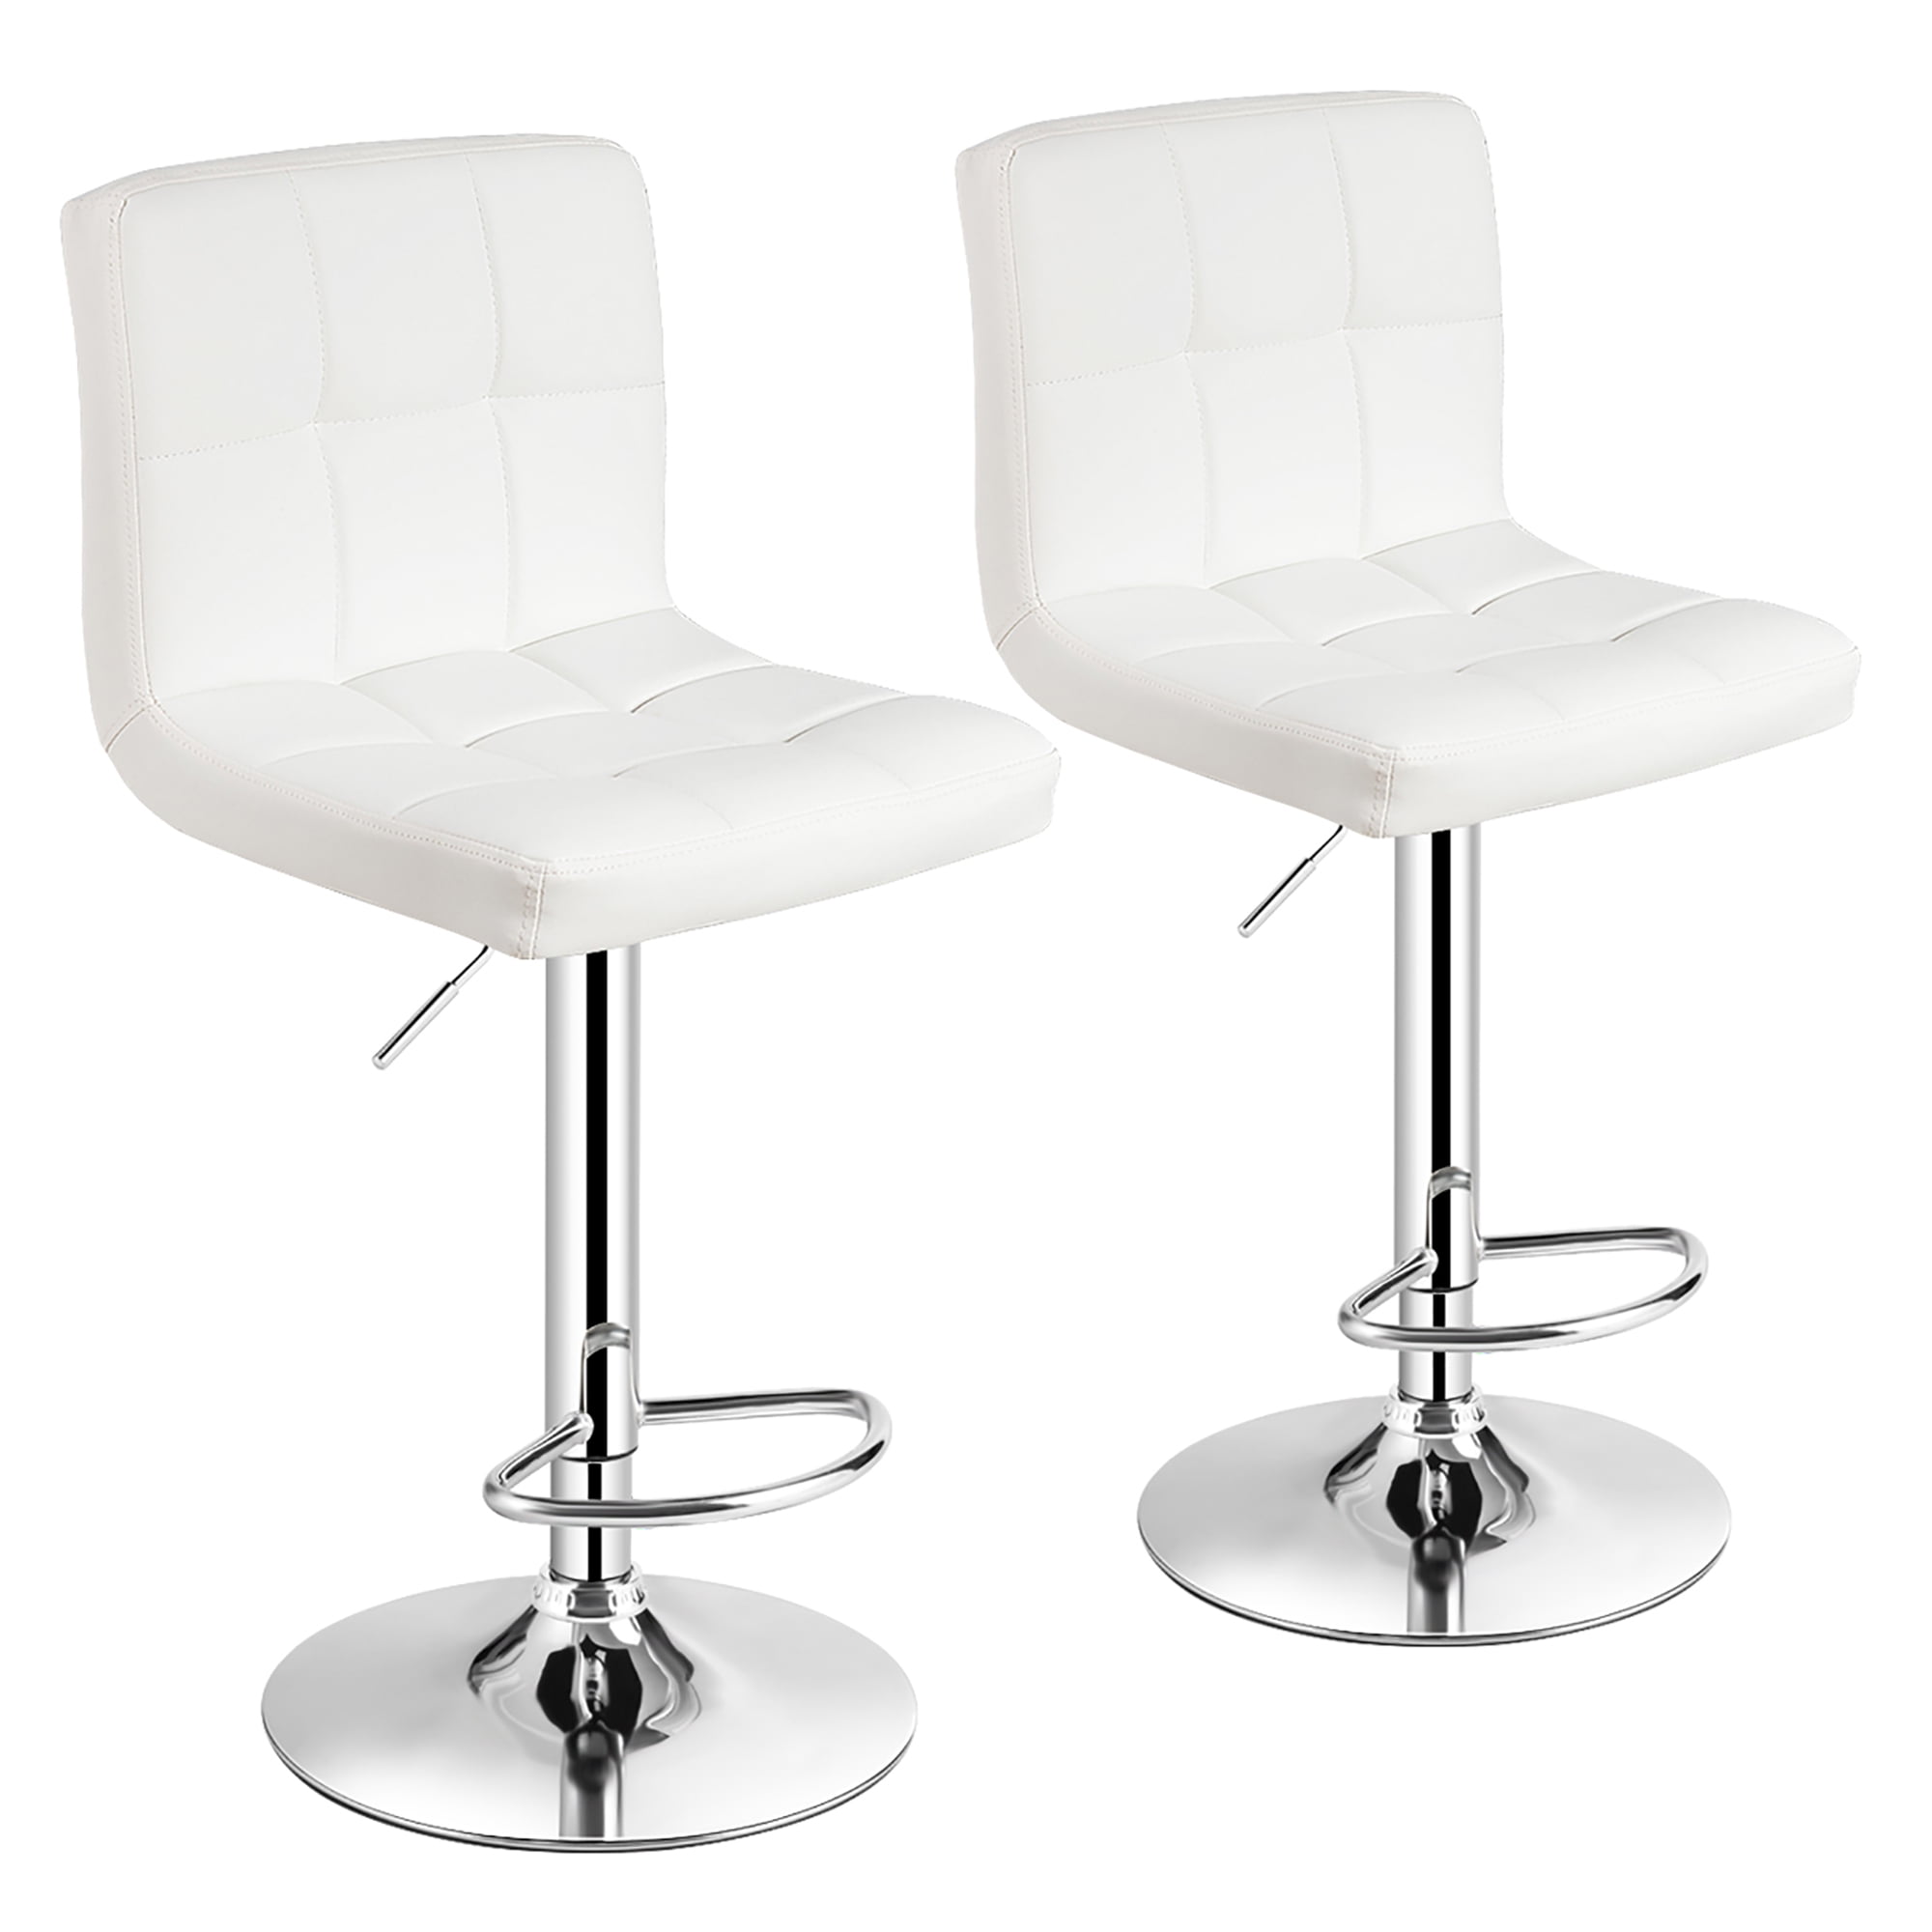 Costway Bar Stool With Swivel, White Bar Stools Set Of 2